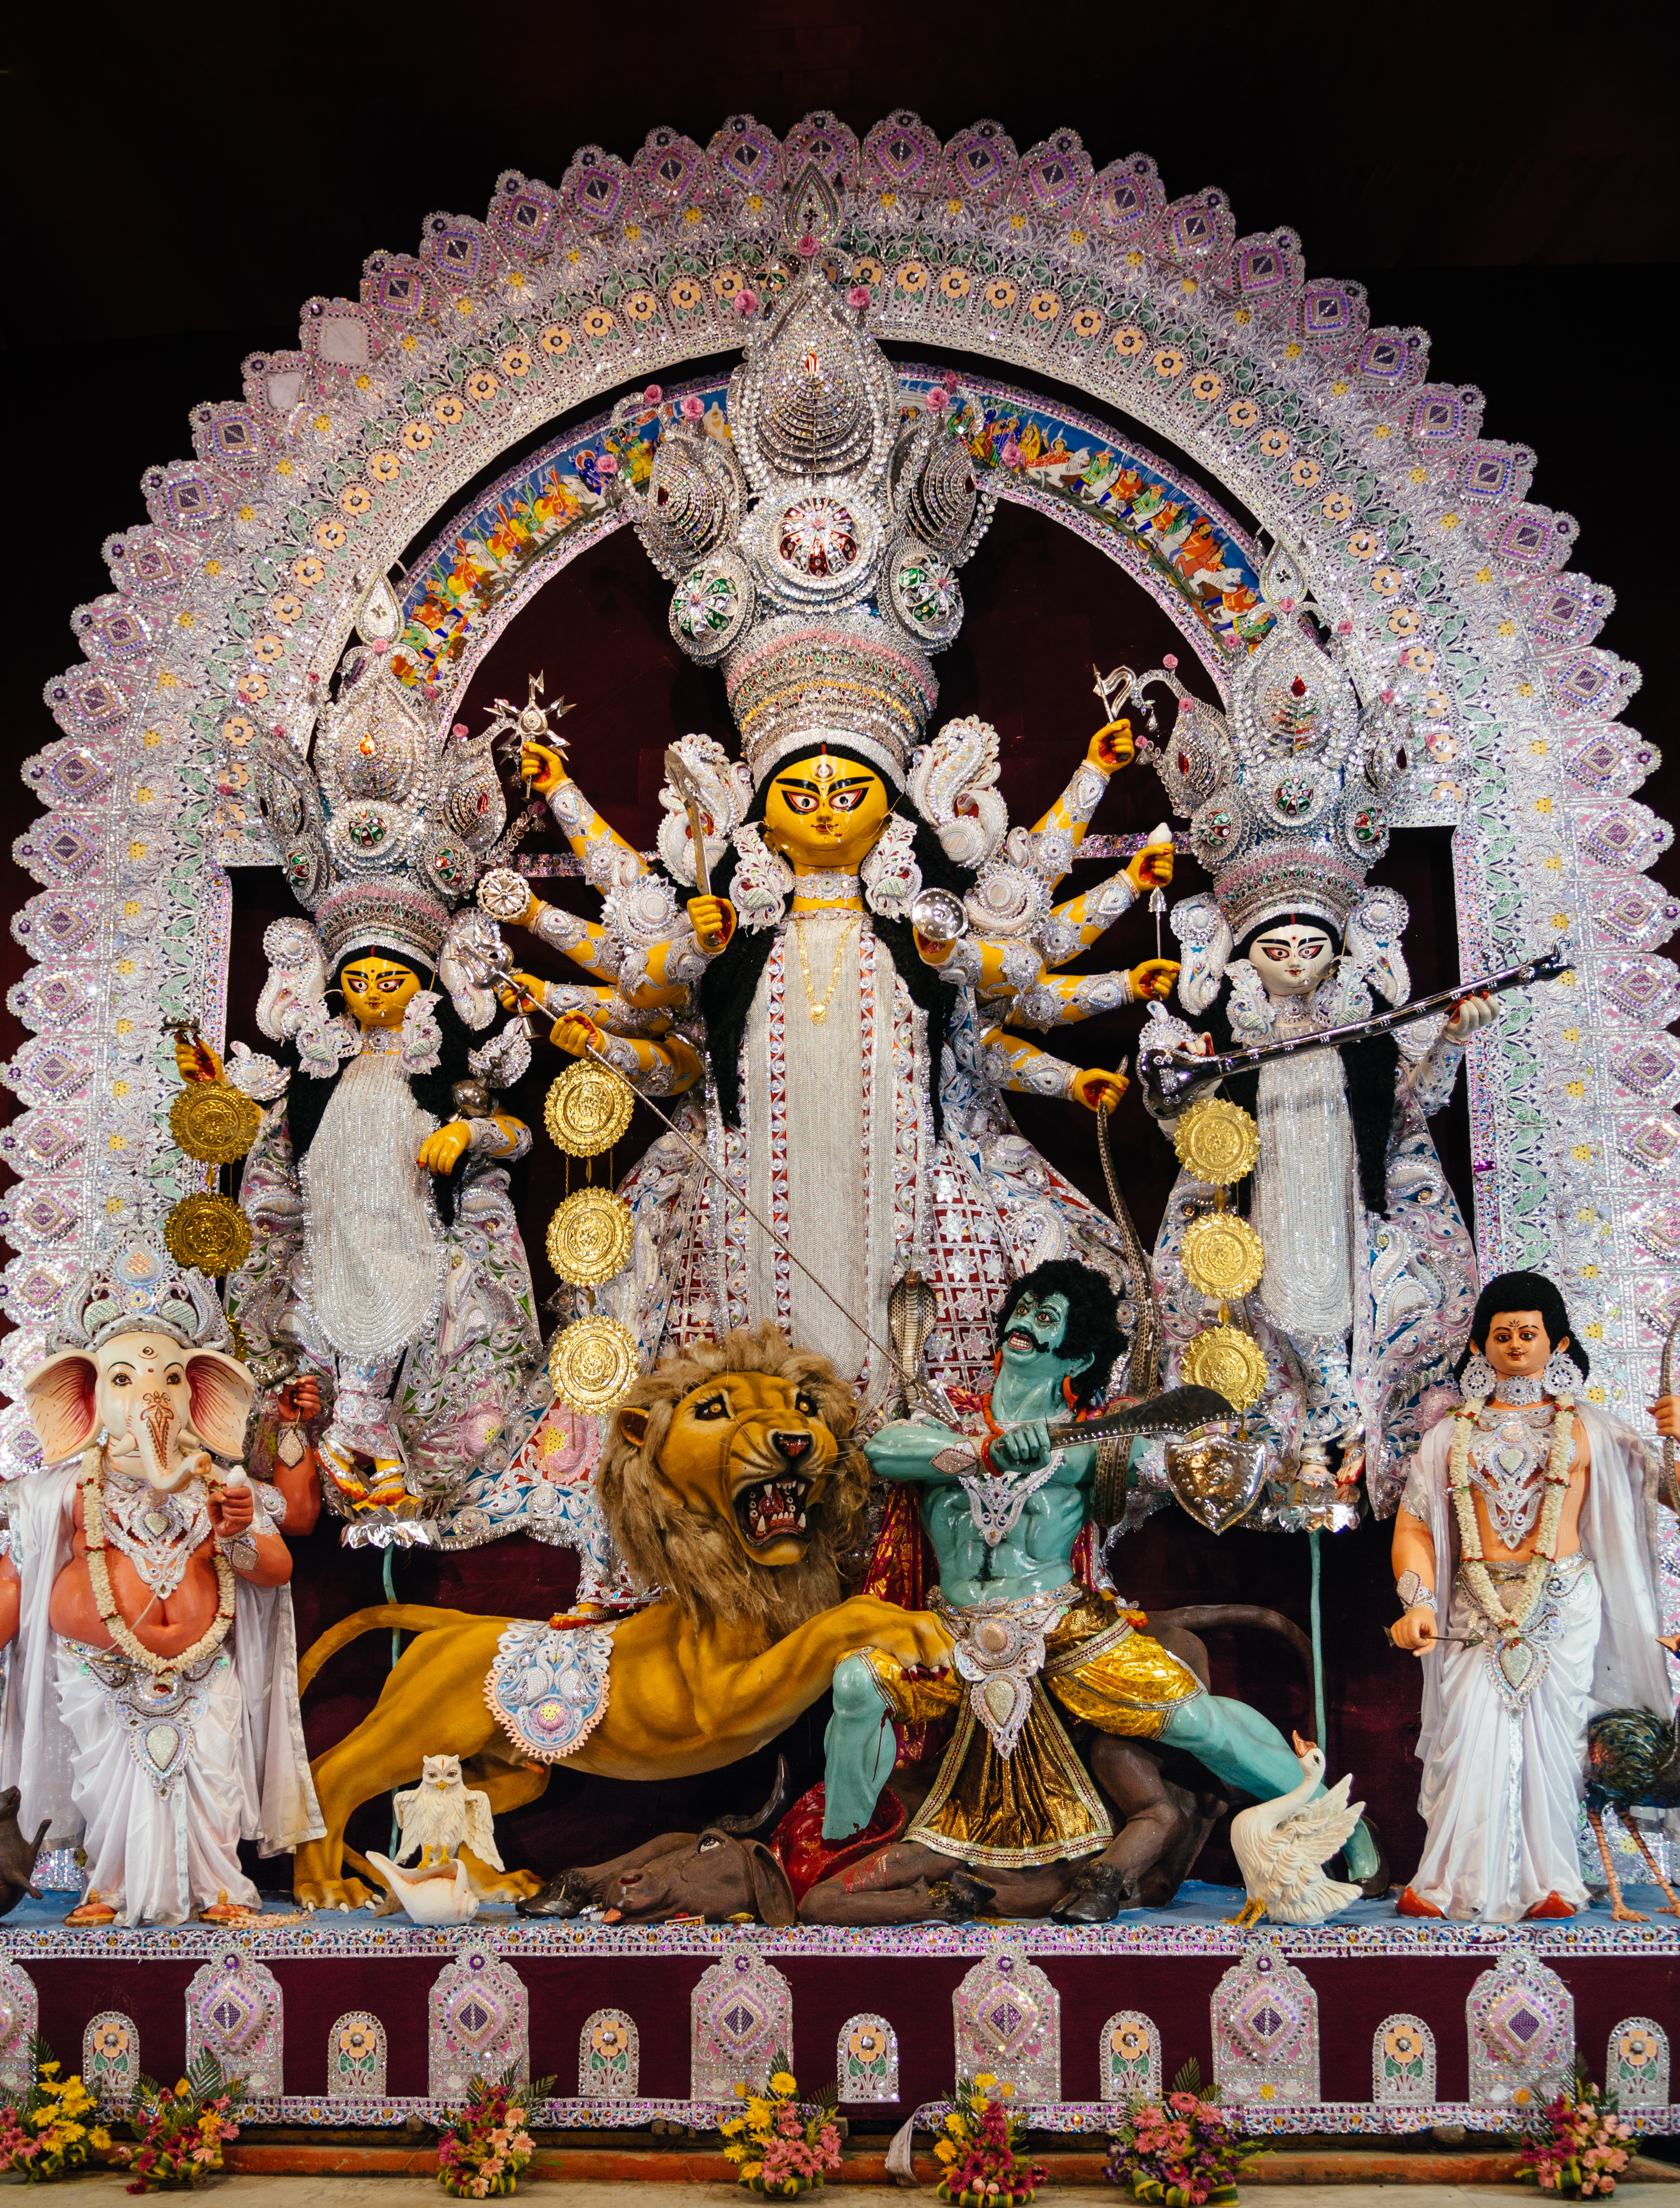 4. Recommendations for Embracing Durga's Mighty Incarnation in your Life